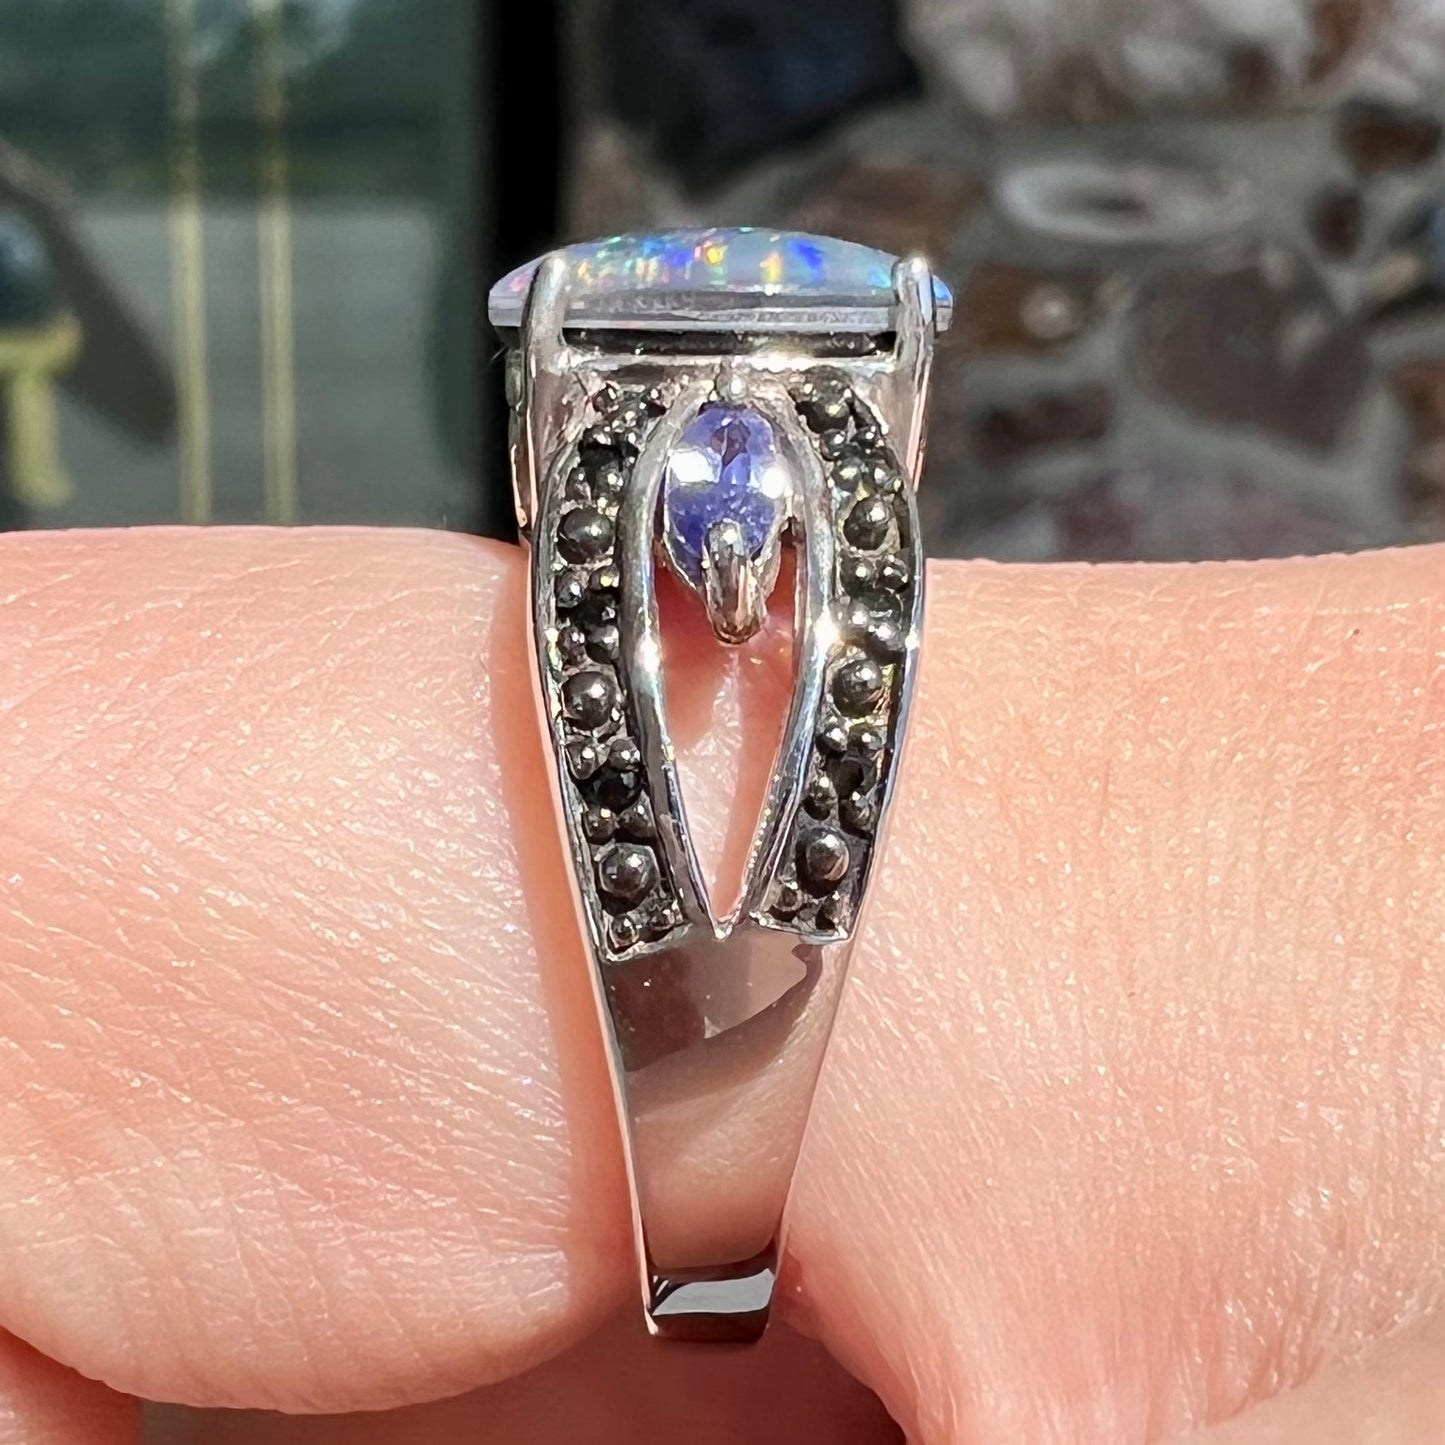 A sterling silver black opal triplet ring set with black spinel and marquise cut tanzanite accent stones.